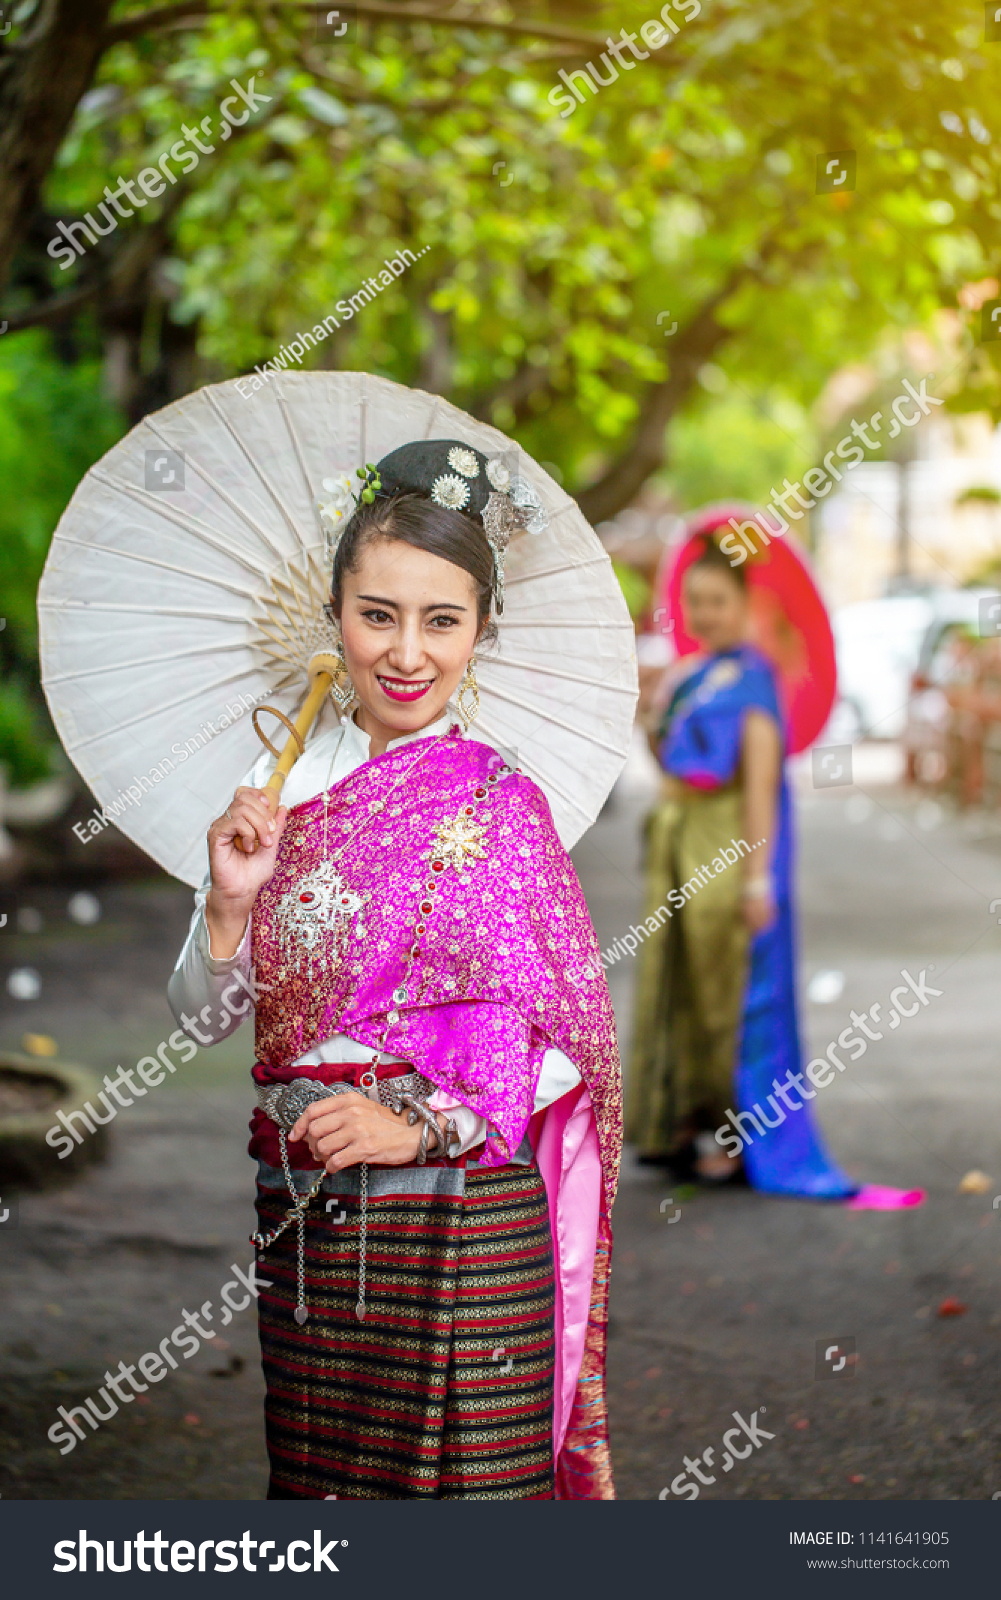 https://image.shutterstock.com/z/stock-photo-pretty-thai-women-in-the-northern-thailand-traditional-dress-with-colourful-robe-and-nice-hair-pin-1141641905.jpg